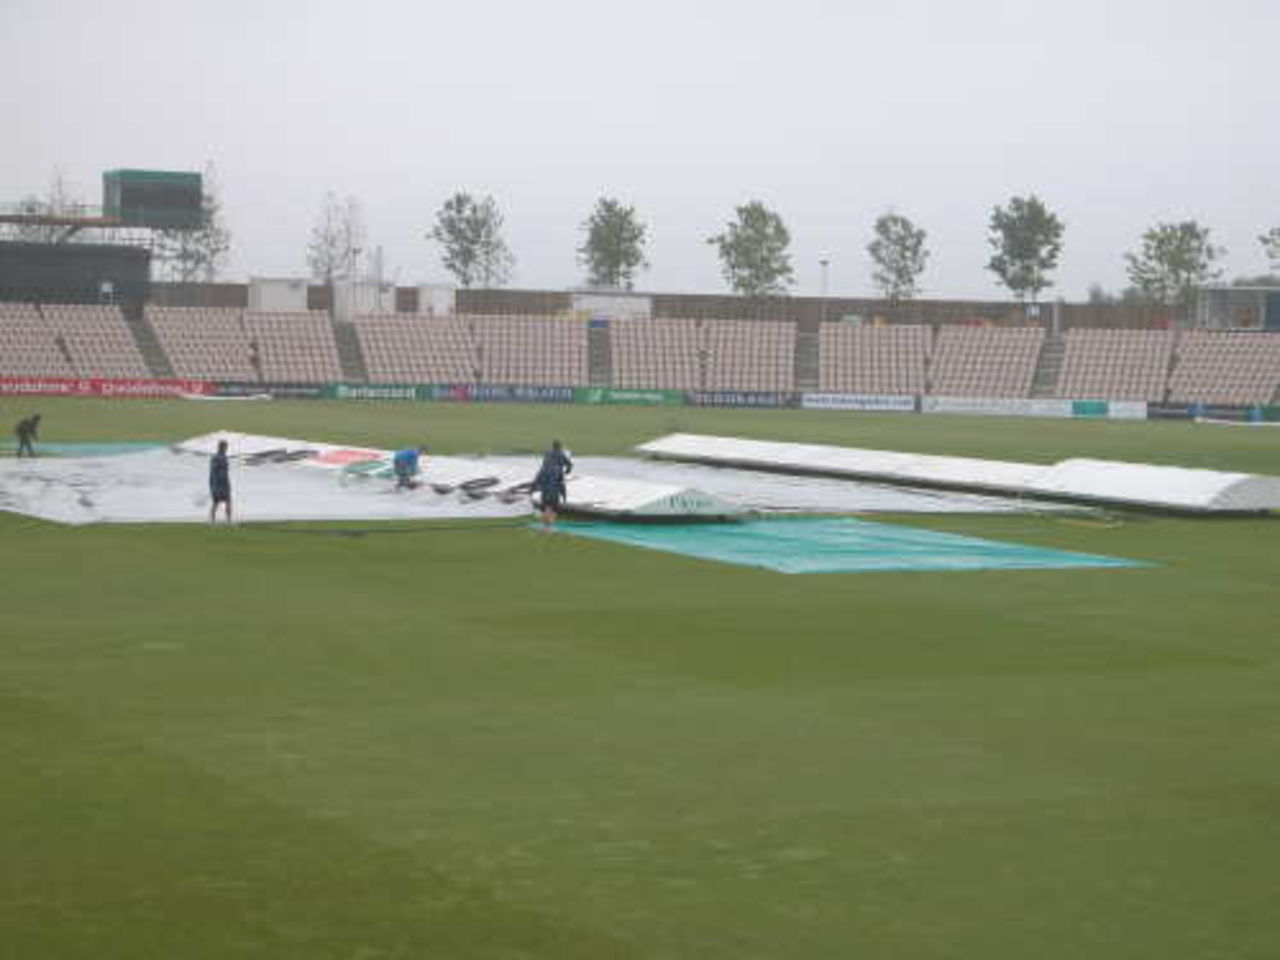 Rain fell all day to take out the third day of the Championship match against Northamptonshire.